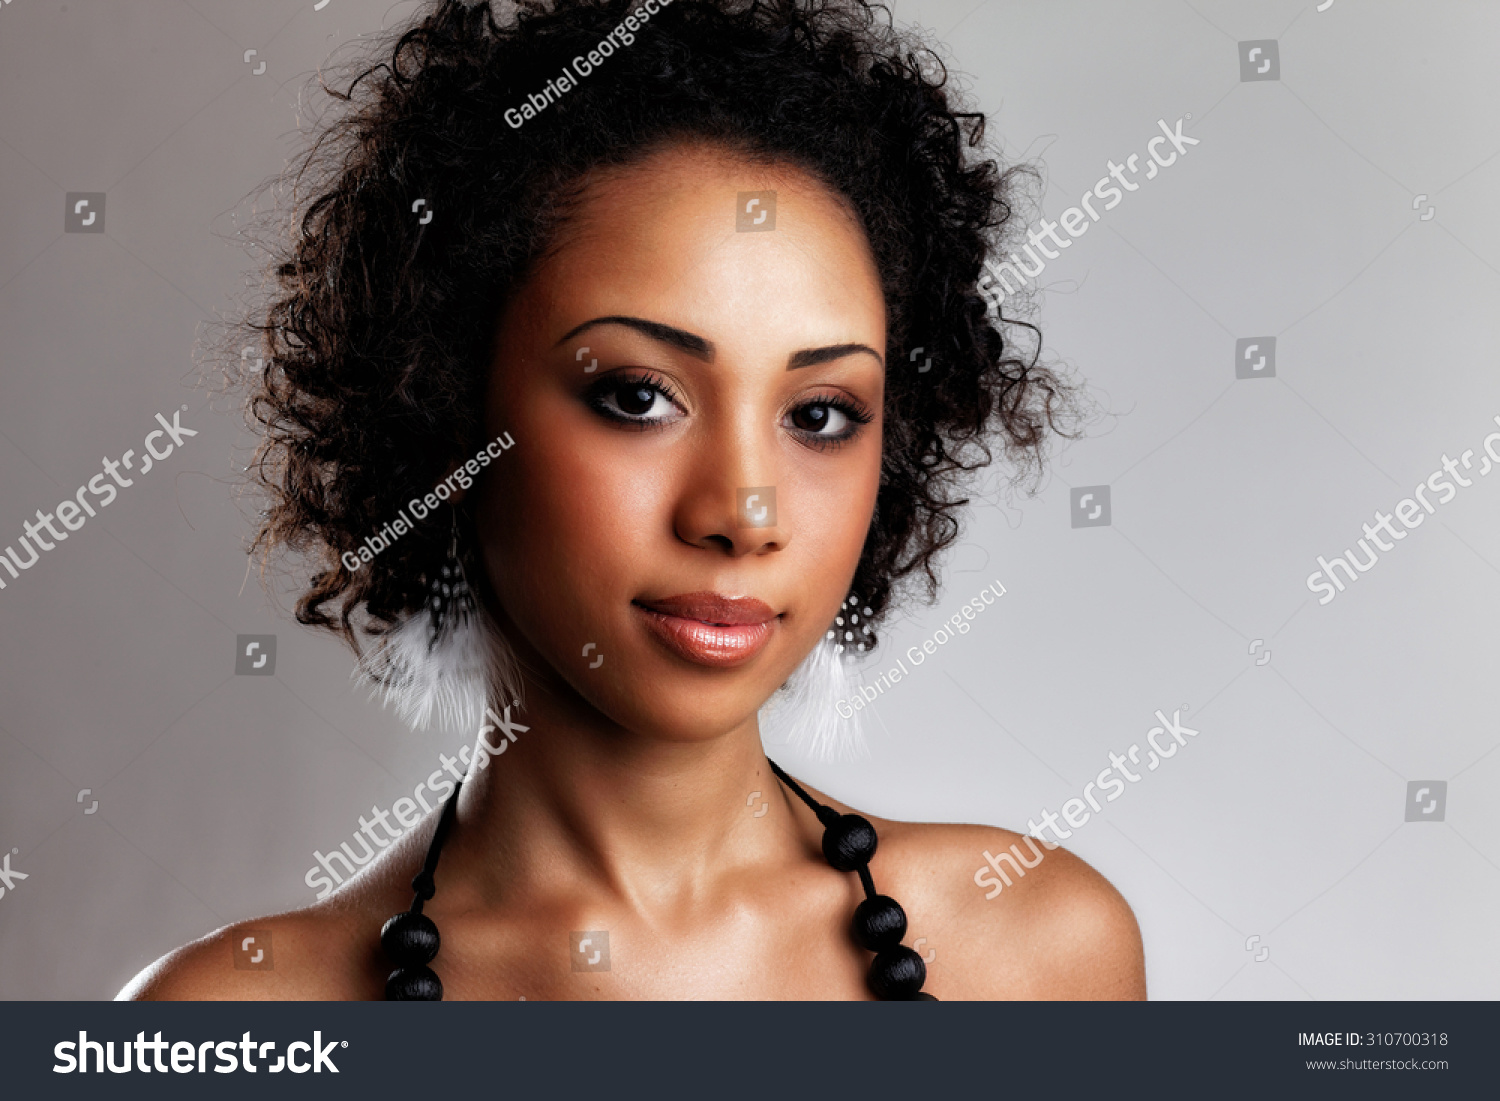 Beautiful black woman posing in a studio. Perfect makeup. Beauty fashion .Close-up portrait of attractive young model with bright make-up. #310700318